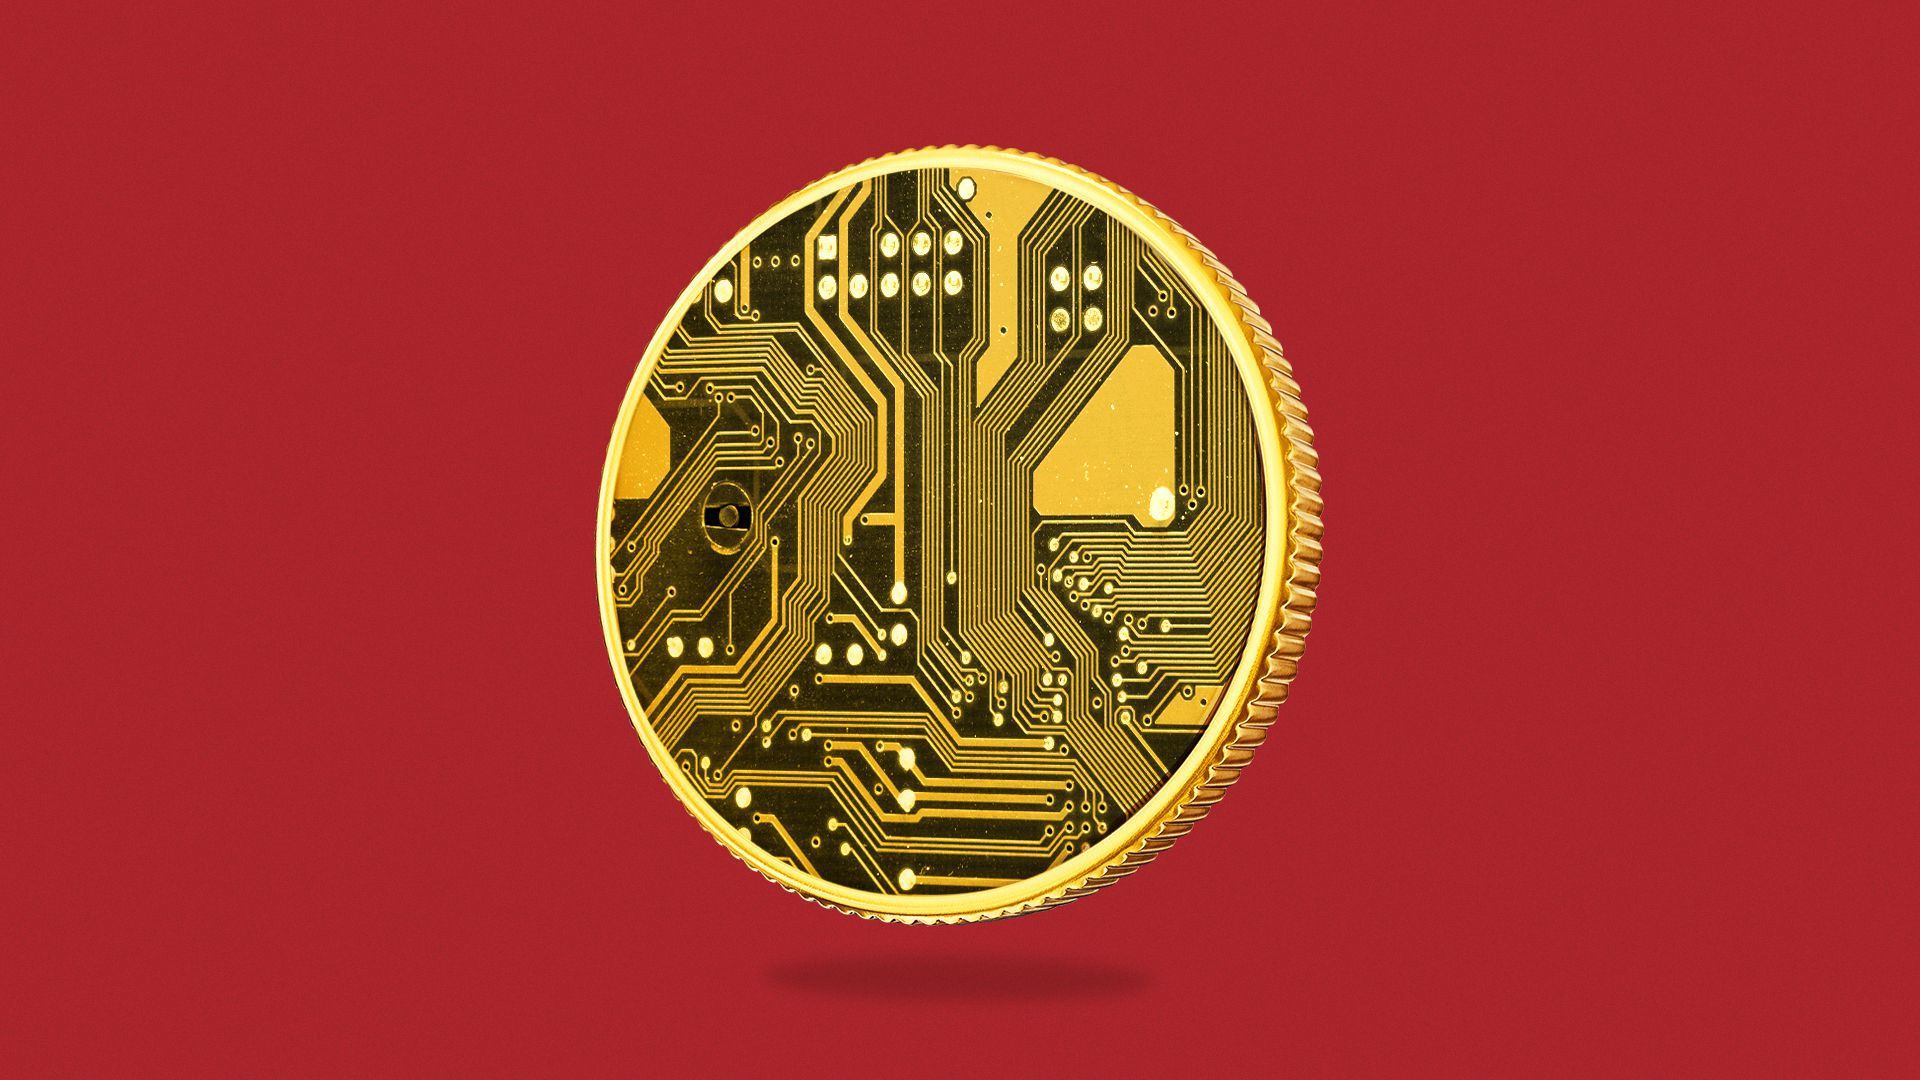 A coin with a red background